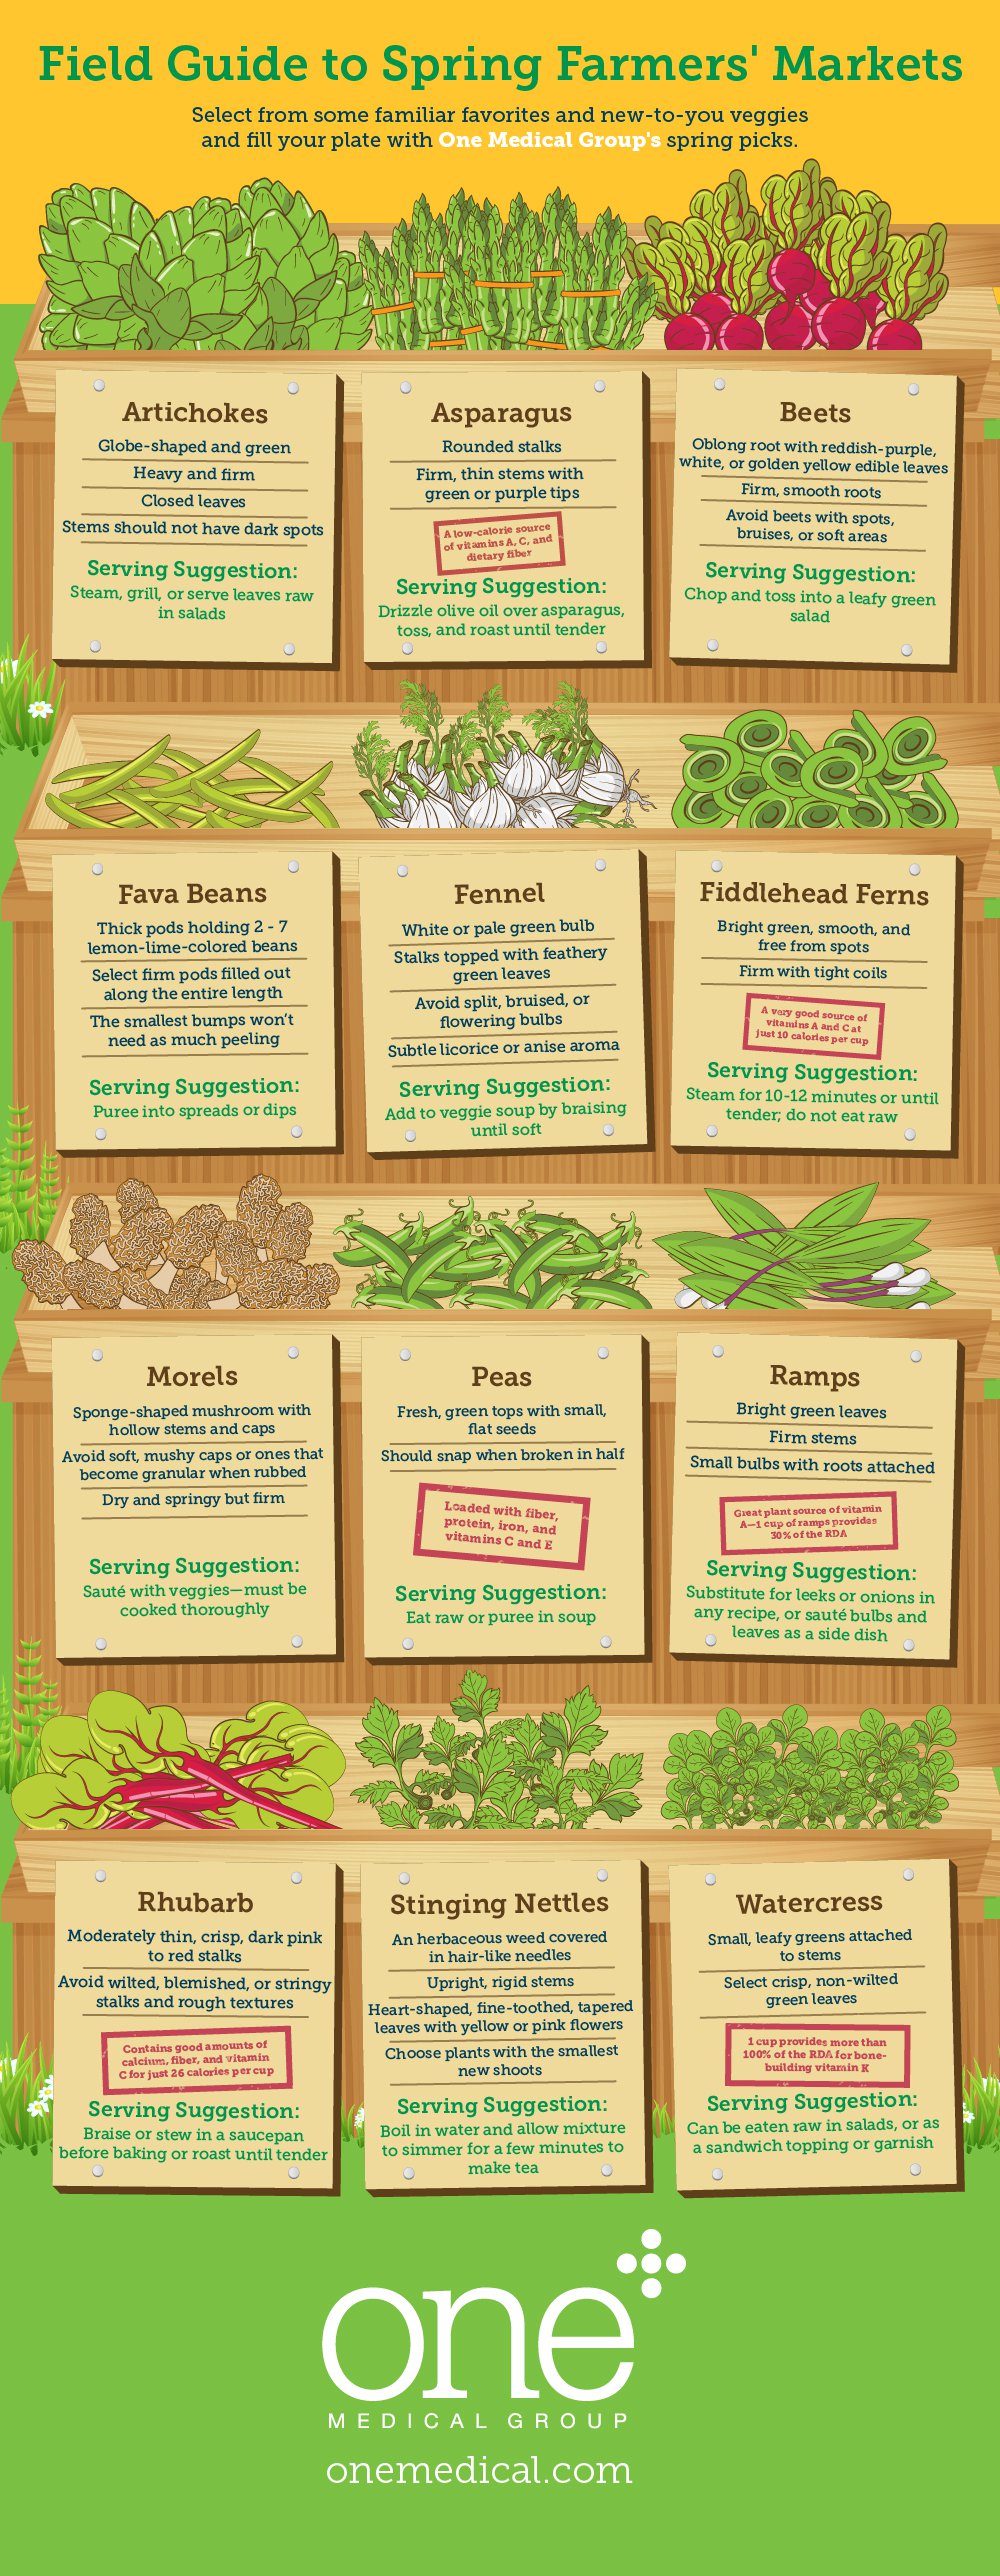 Field Guide to Spring Farmers' Markets | One Medical